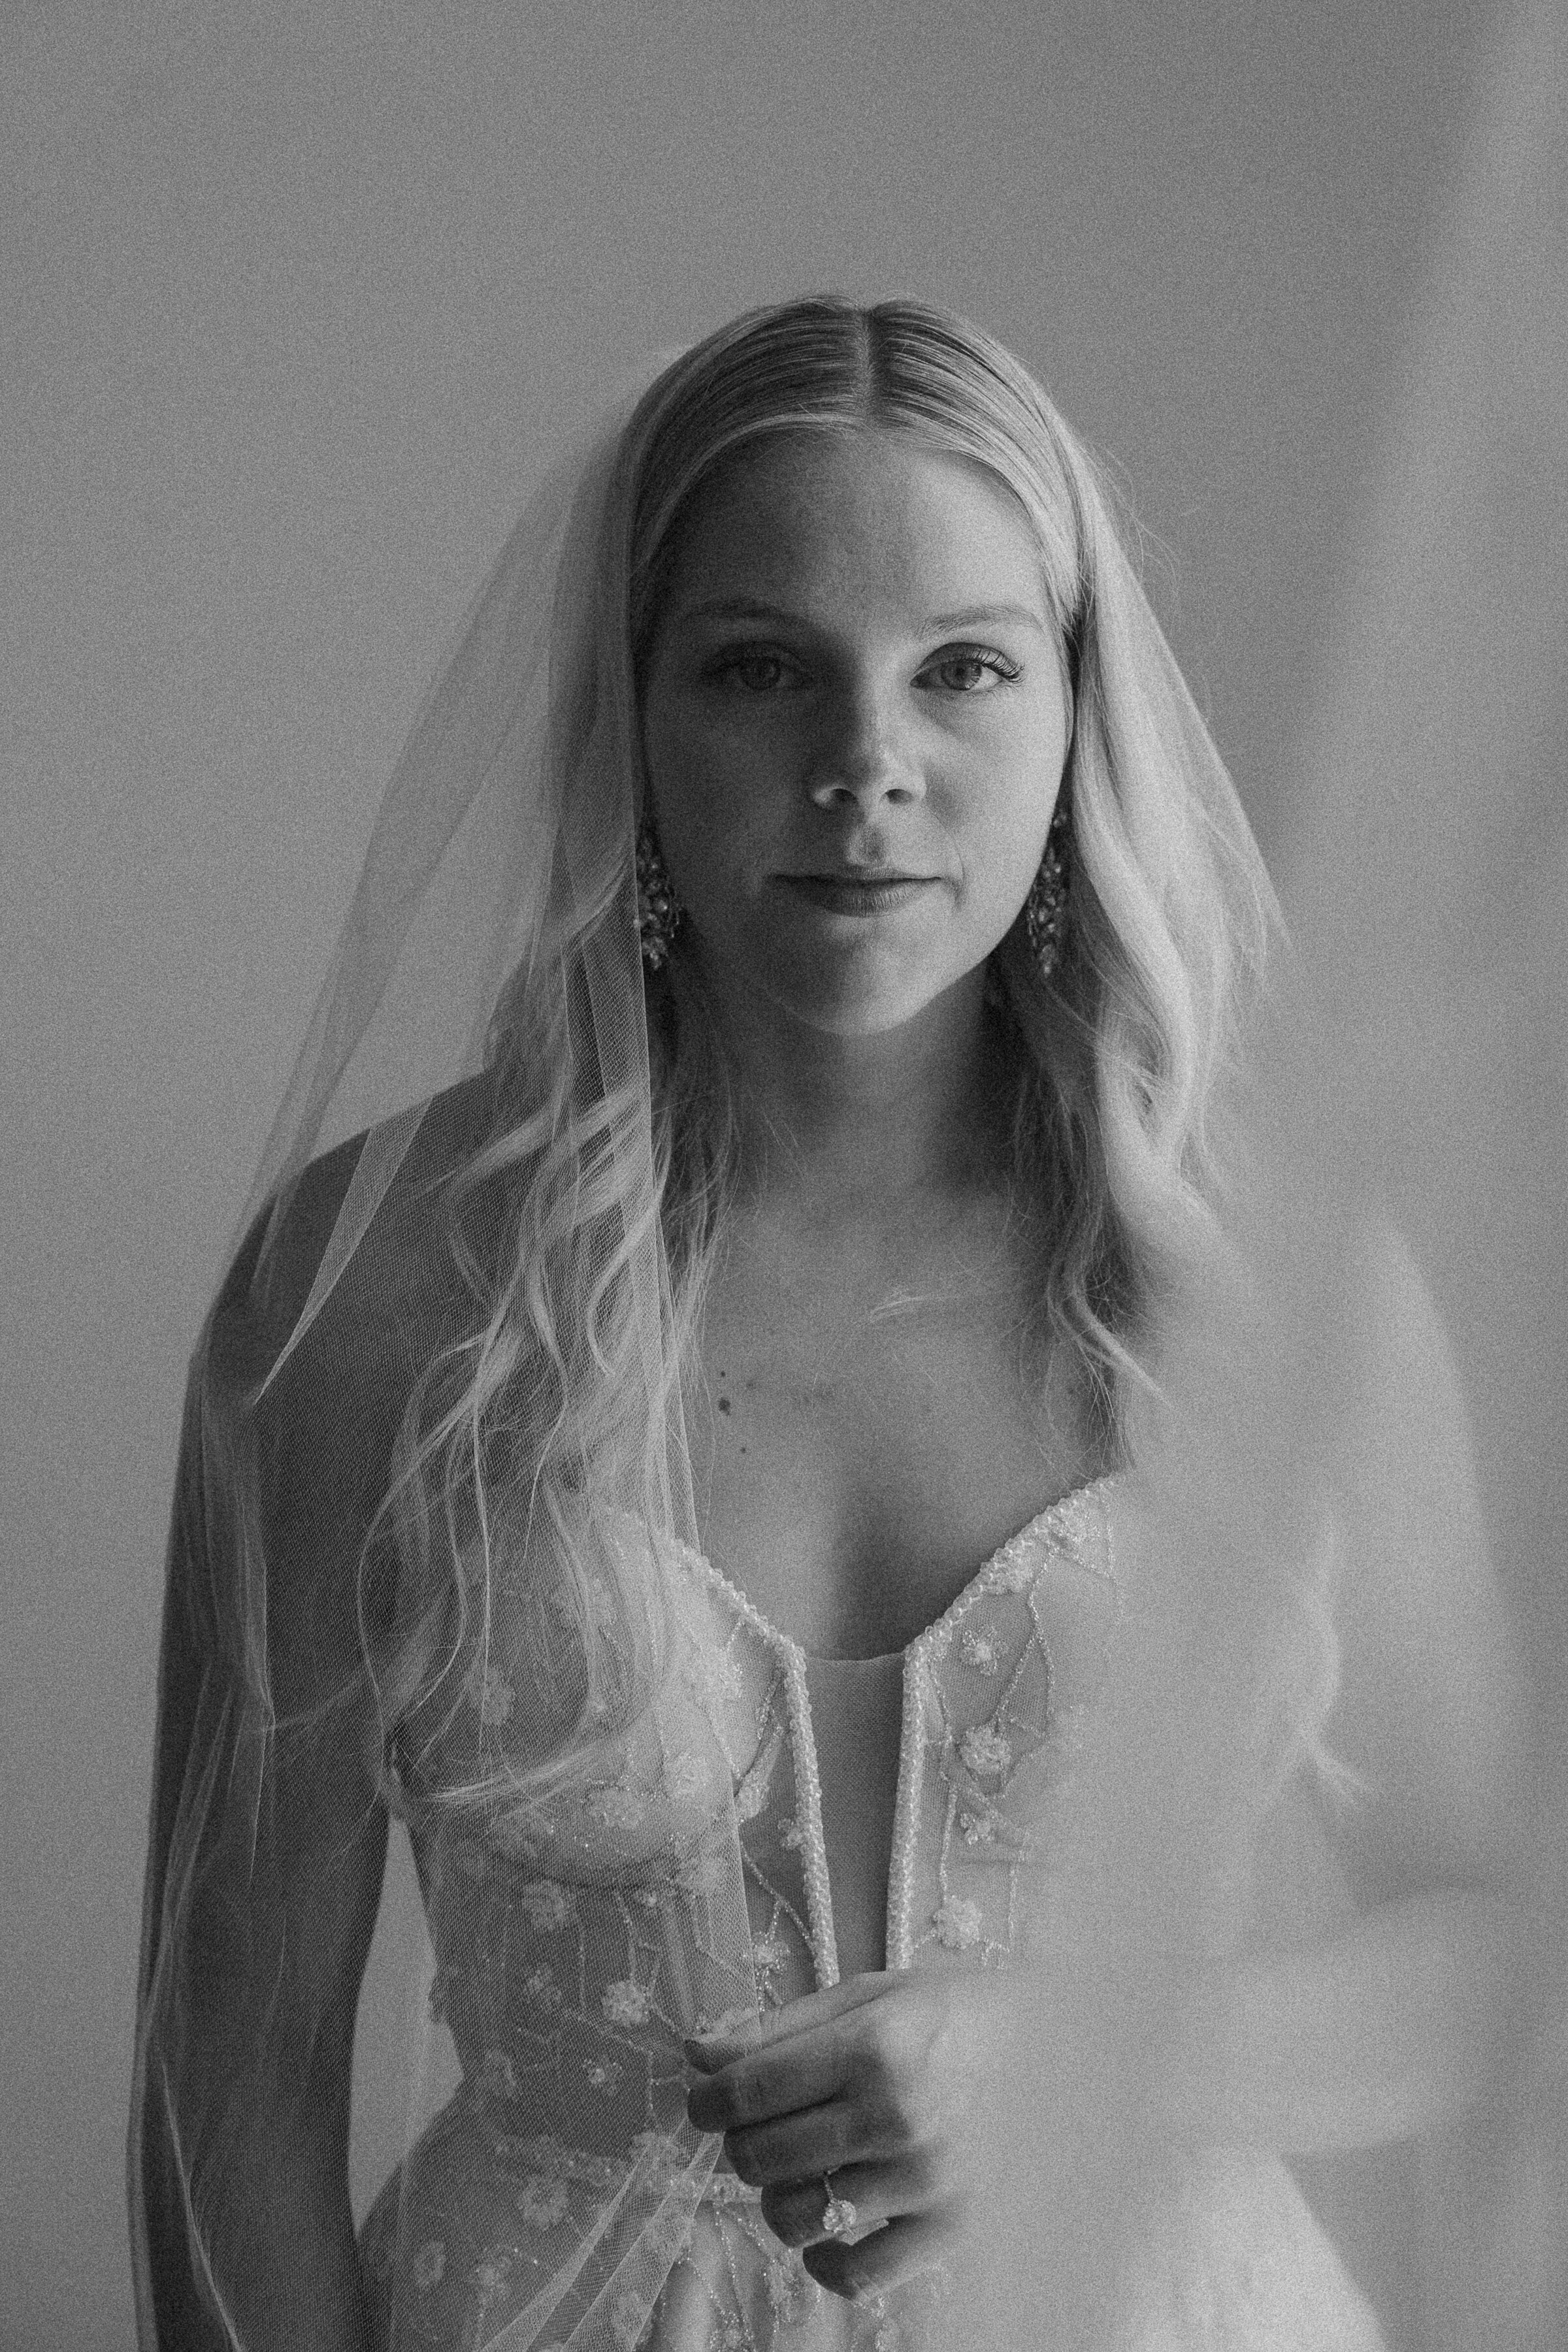 Portrait of a bride in a wedding dress with a veil, black and white photo.